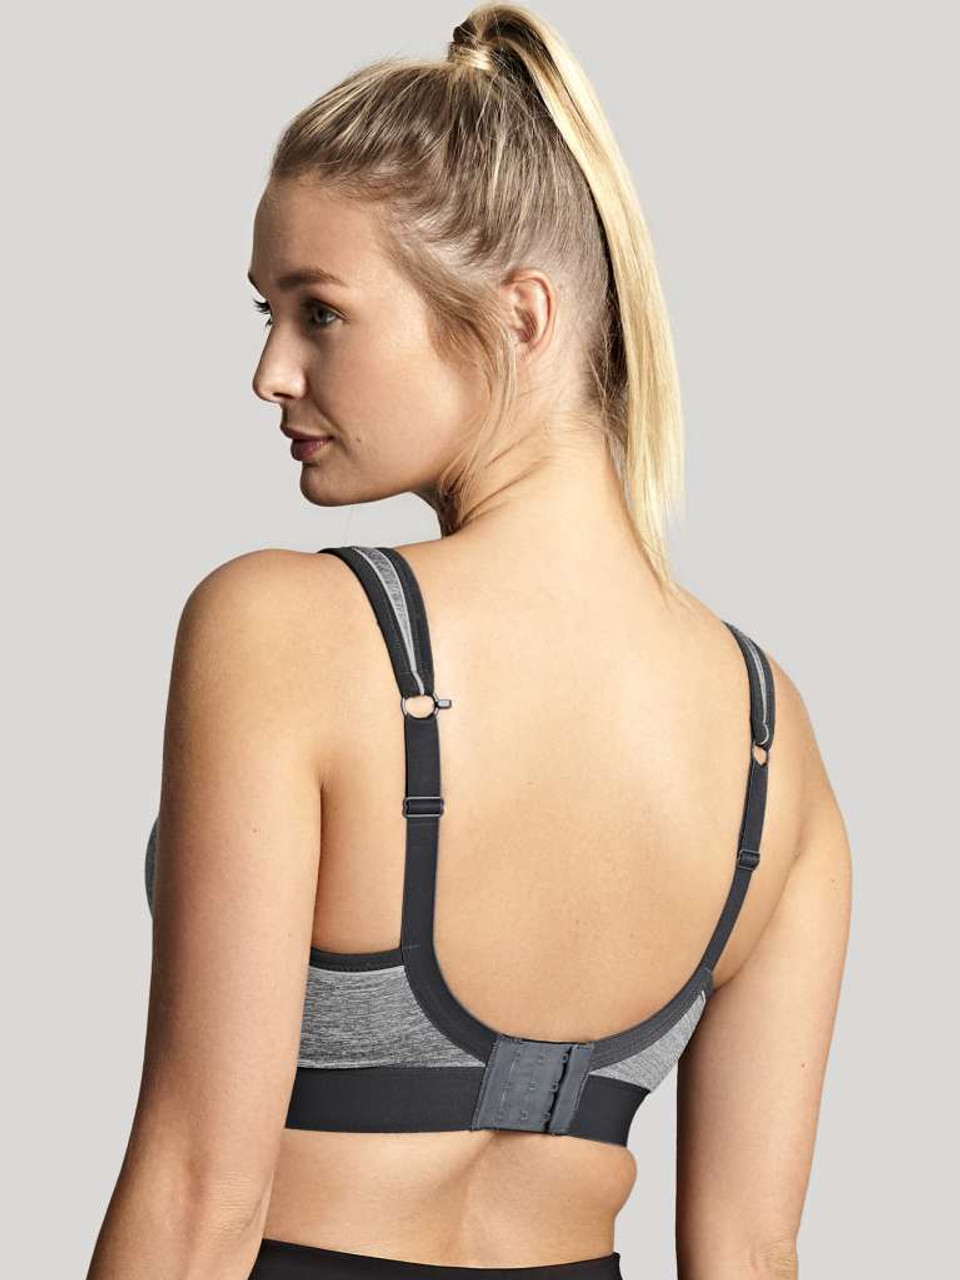 Panache Non-Wired Sports Bra in Charcoal Marlin - Busted Bra Shop